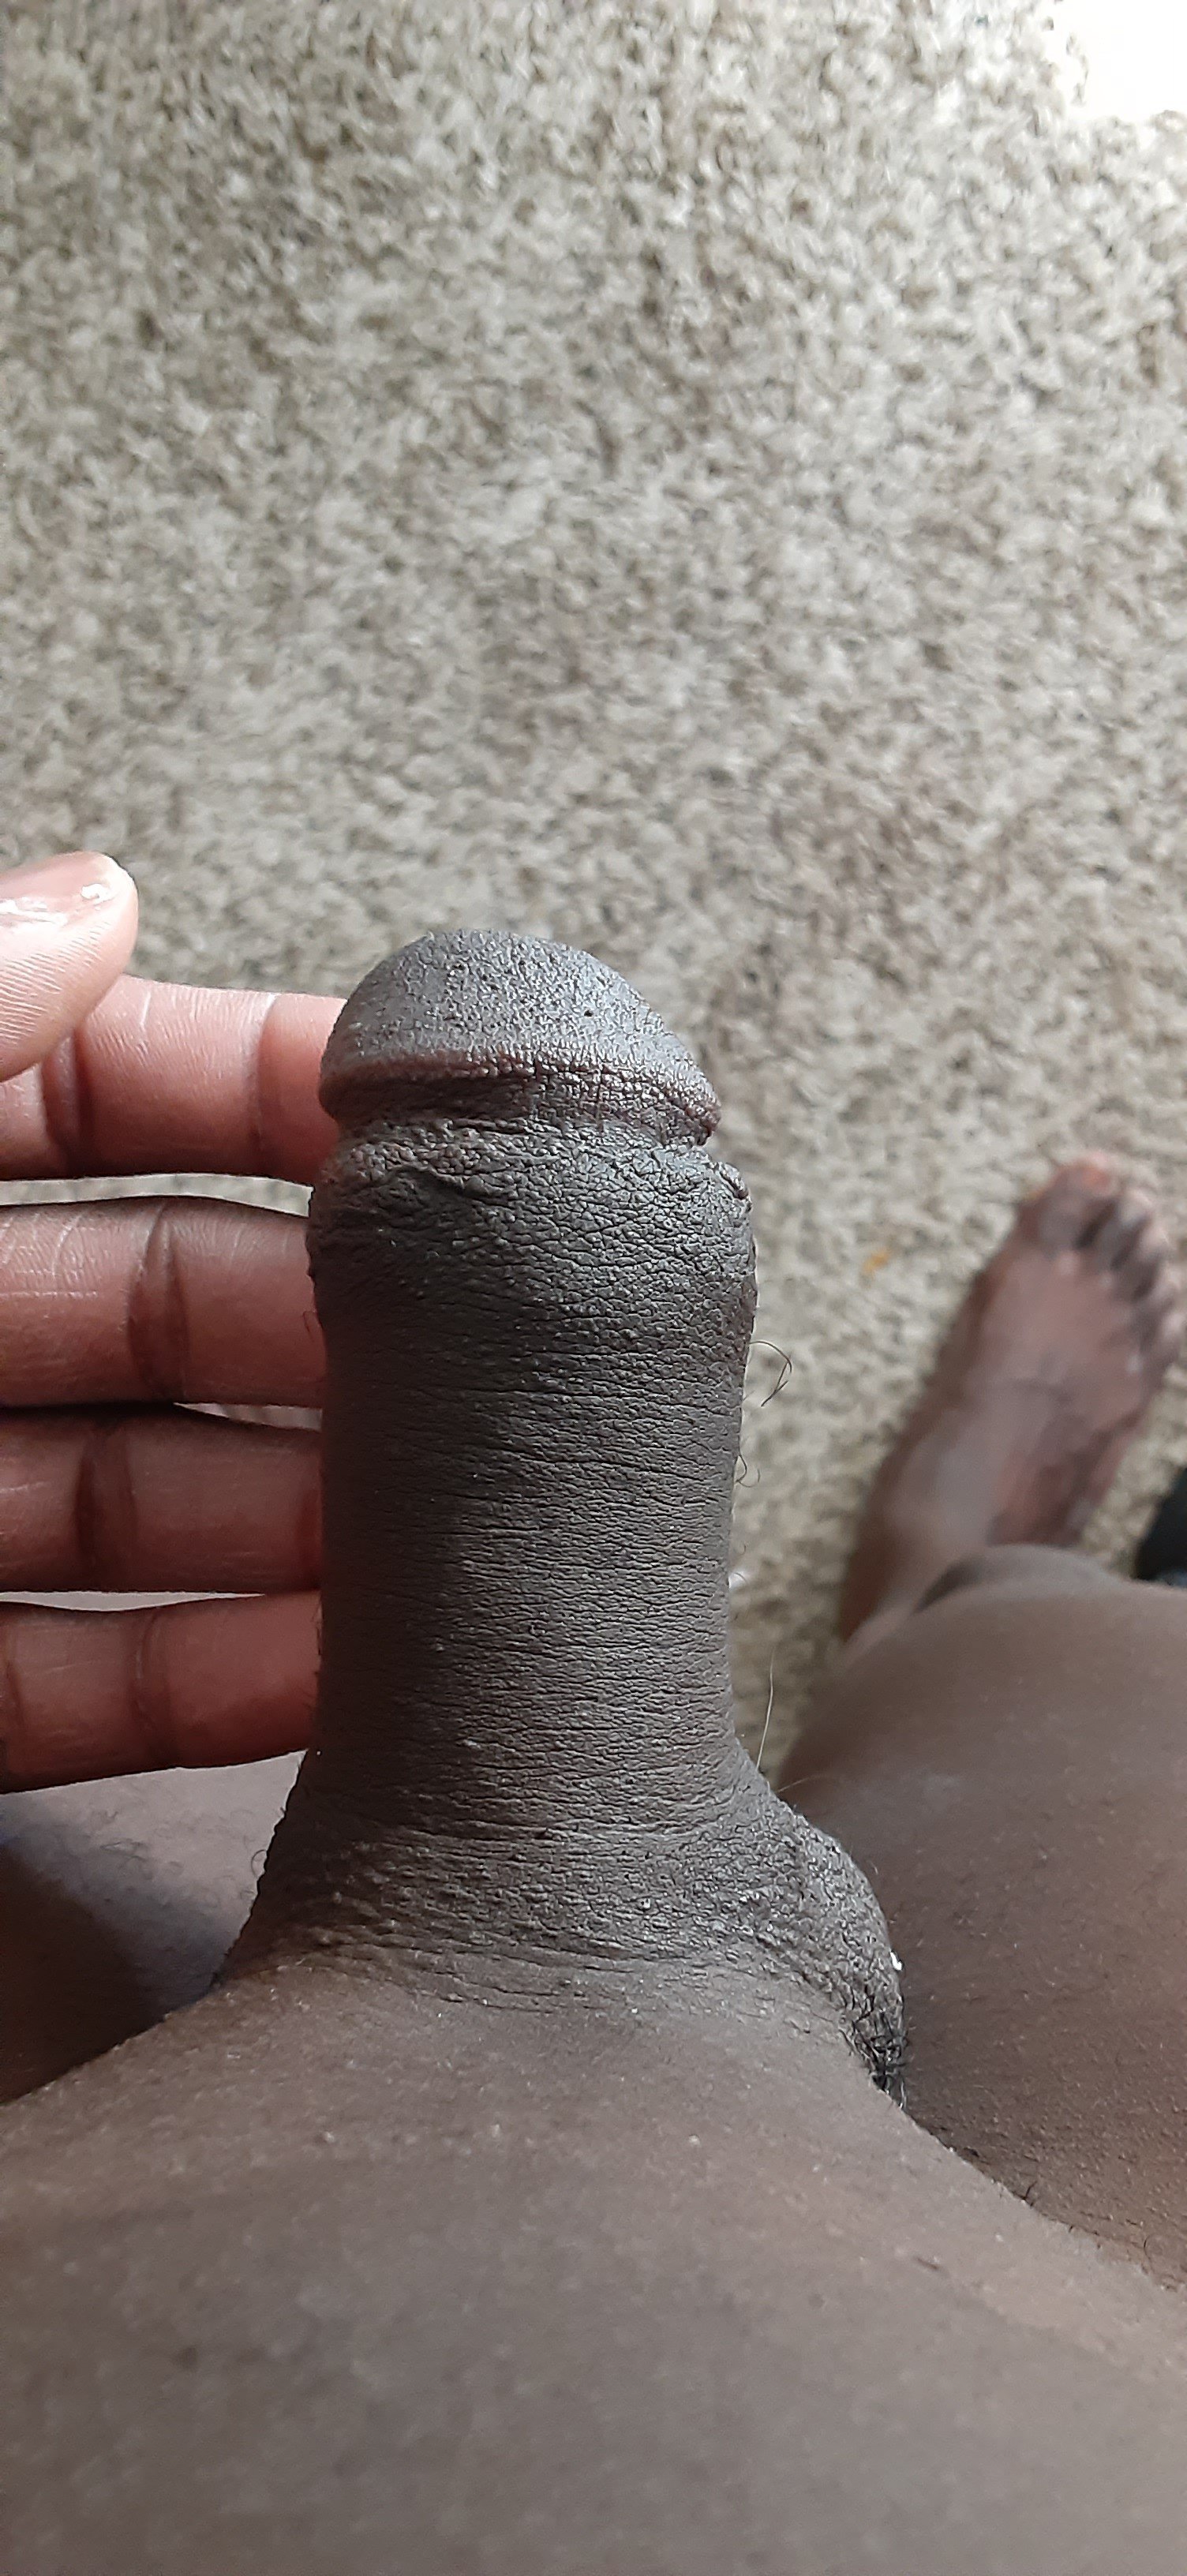 Photo by CupcakeKinkster with the username @CupcakeKinkster, who is a verified user,  February 26, 2020 at 6:39 PM and the text says 'Y'all...I want you to look at how small and pathetic my clitty is. Go ahead and laugh it at. Tell me how much of a pathetic bitch I am. But it's okay, because I only live to serve real men with REAL cocks so my clitty dosen't have to be big. I'm just a..'